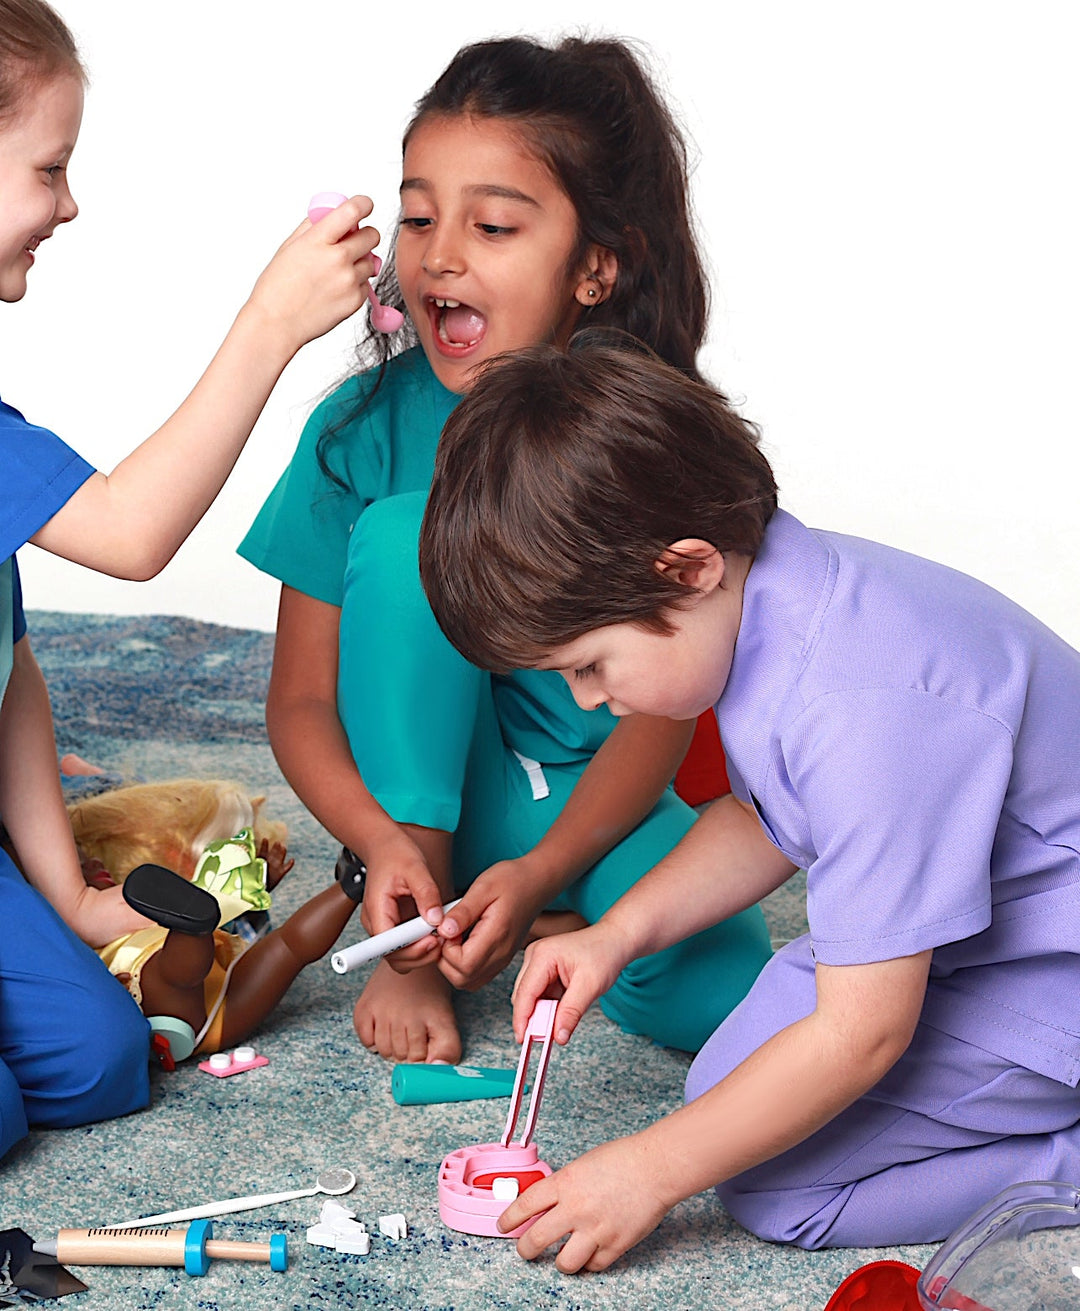 Children's Dress-Up Scrubs - Teal and Lilac Scrubs - Fit For Icons